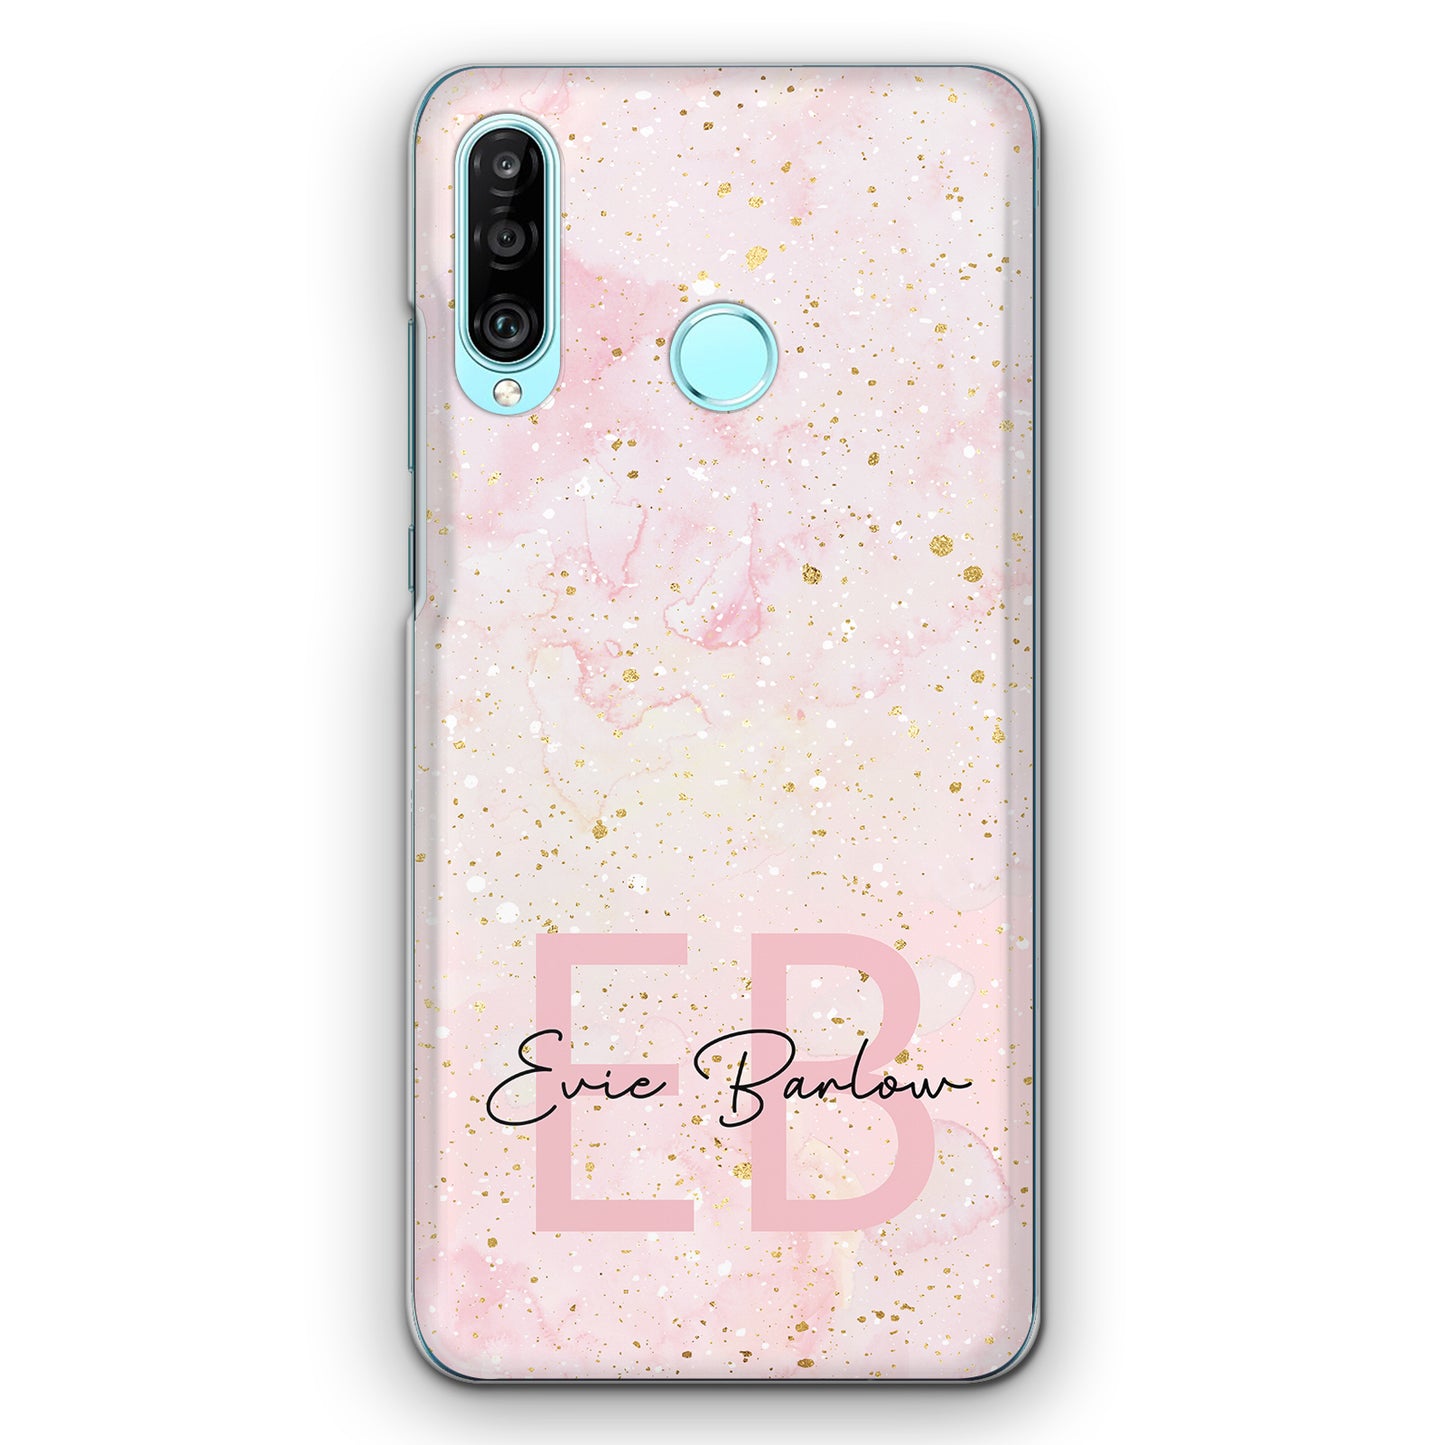 Personalised Nokia Phone Hard Case with Soft Monogram and Name on Baby Pink Marble